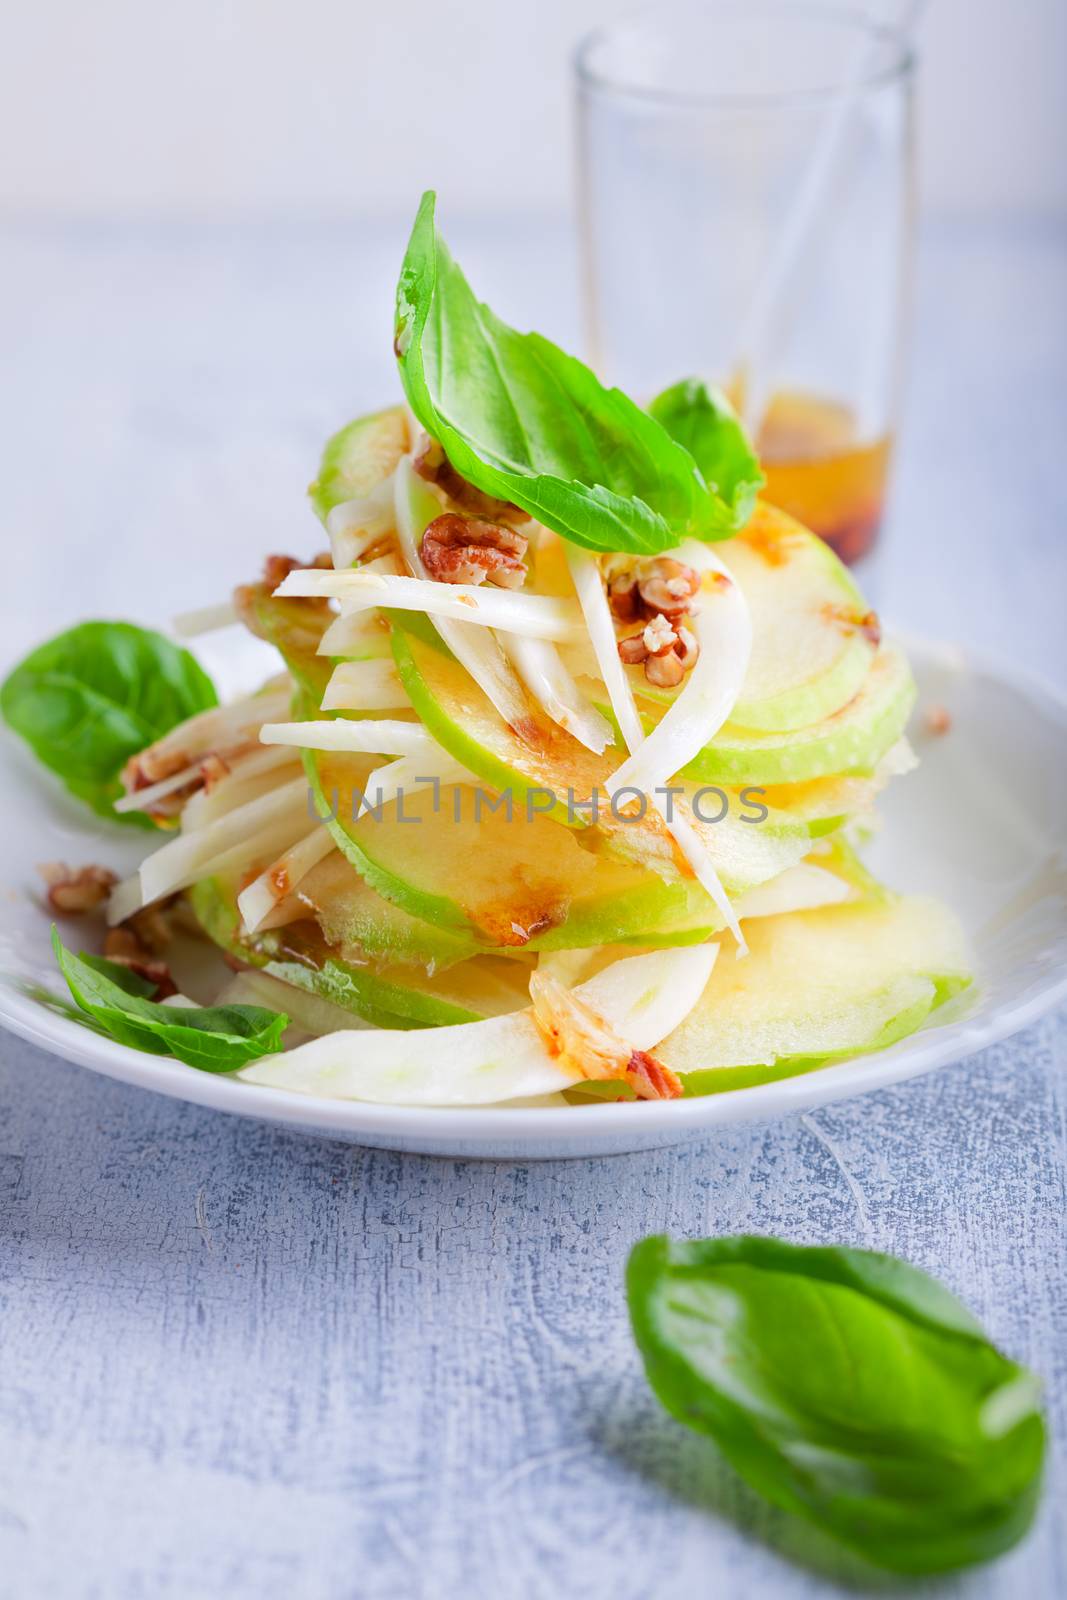 Fennel and apple salad on a wooden surface